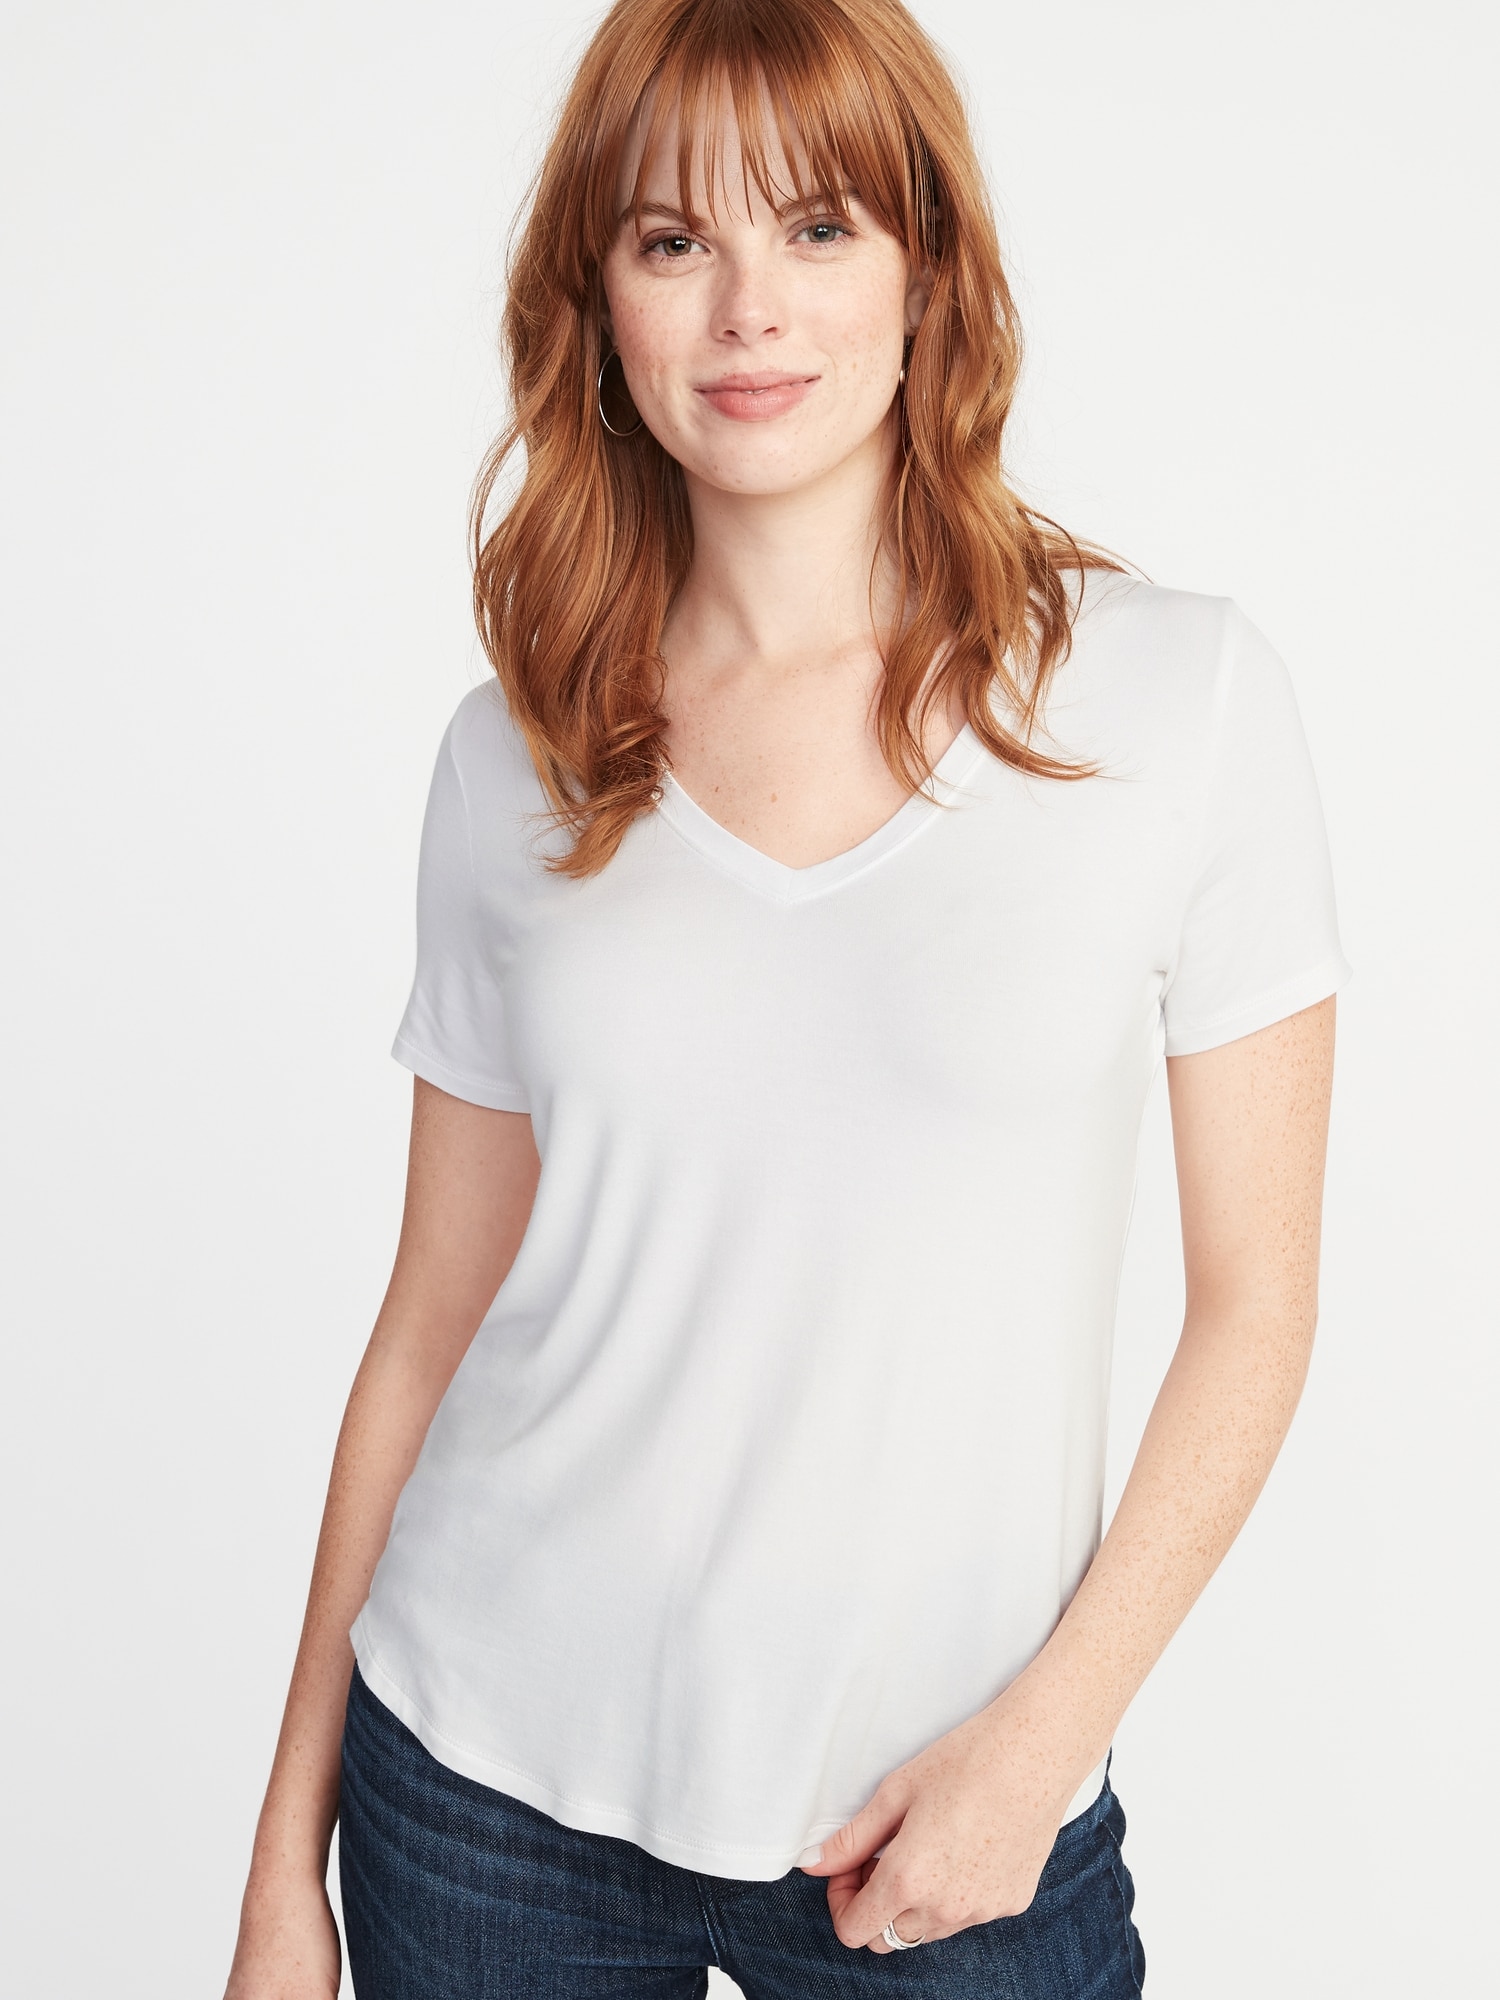 Wardrobe essentials Luxe v-neck Tee from Old Navy